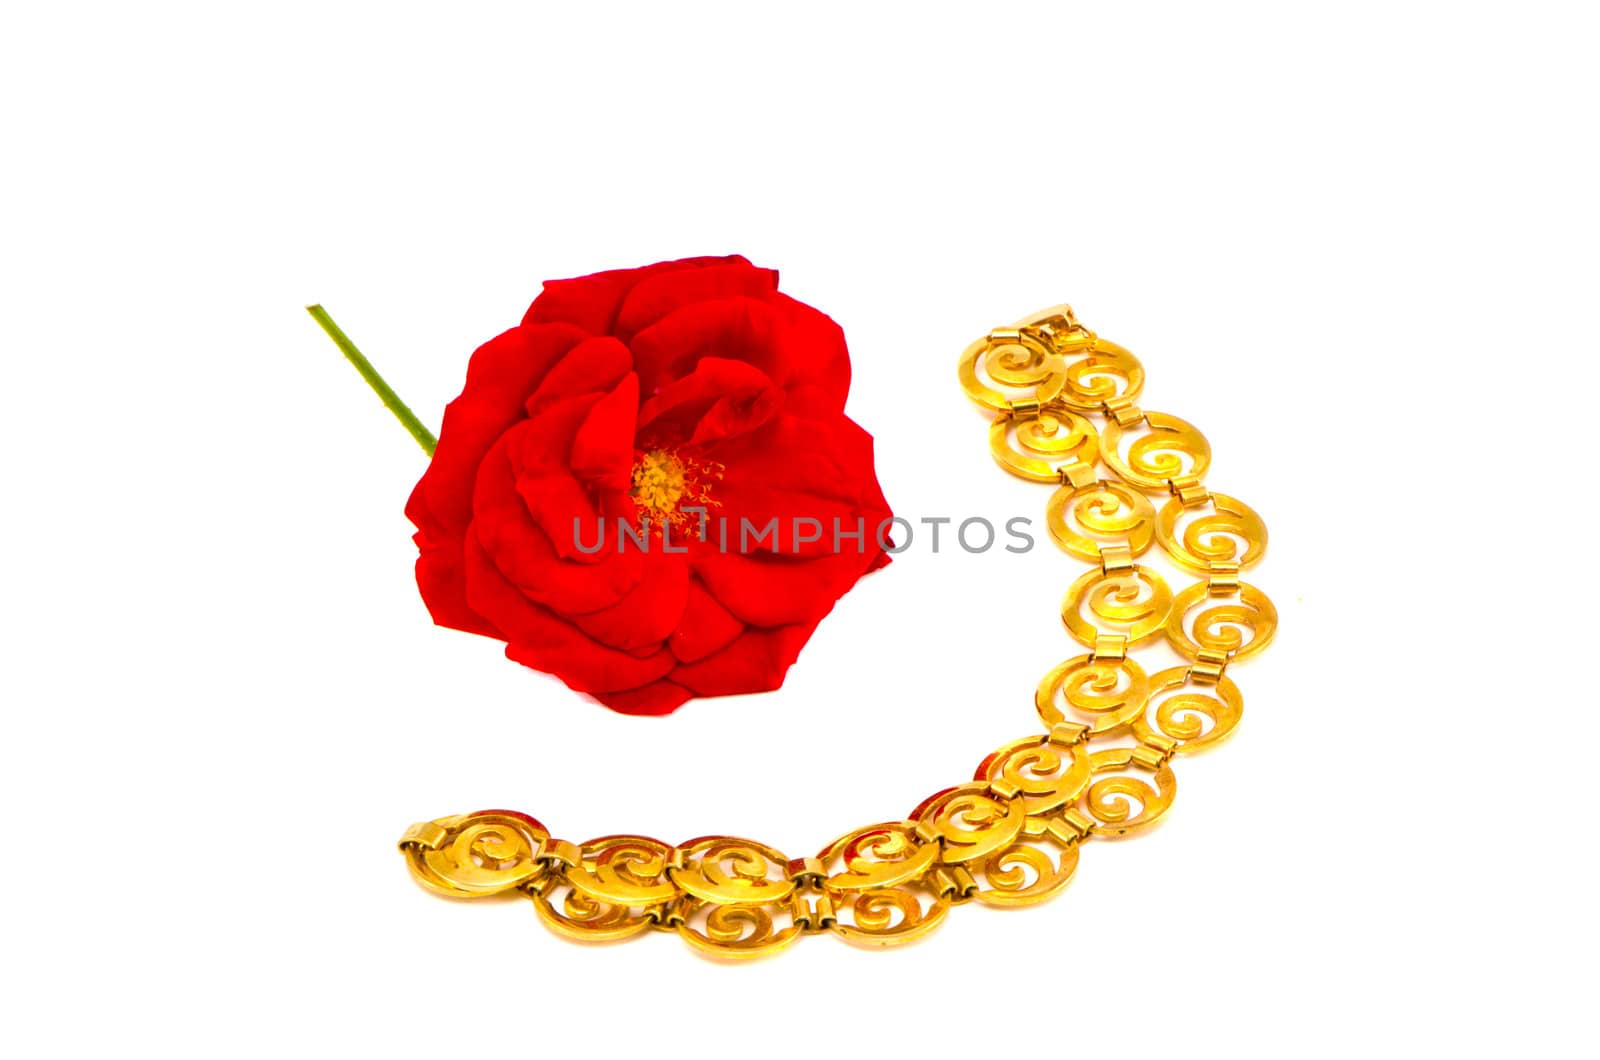 red rose and golden chain necklace isolated on white